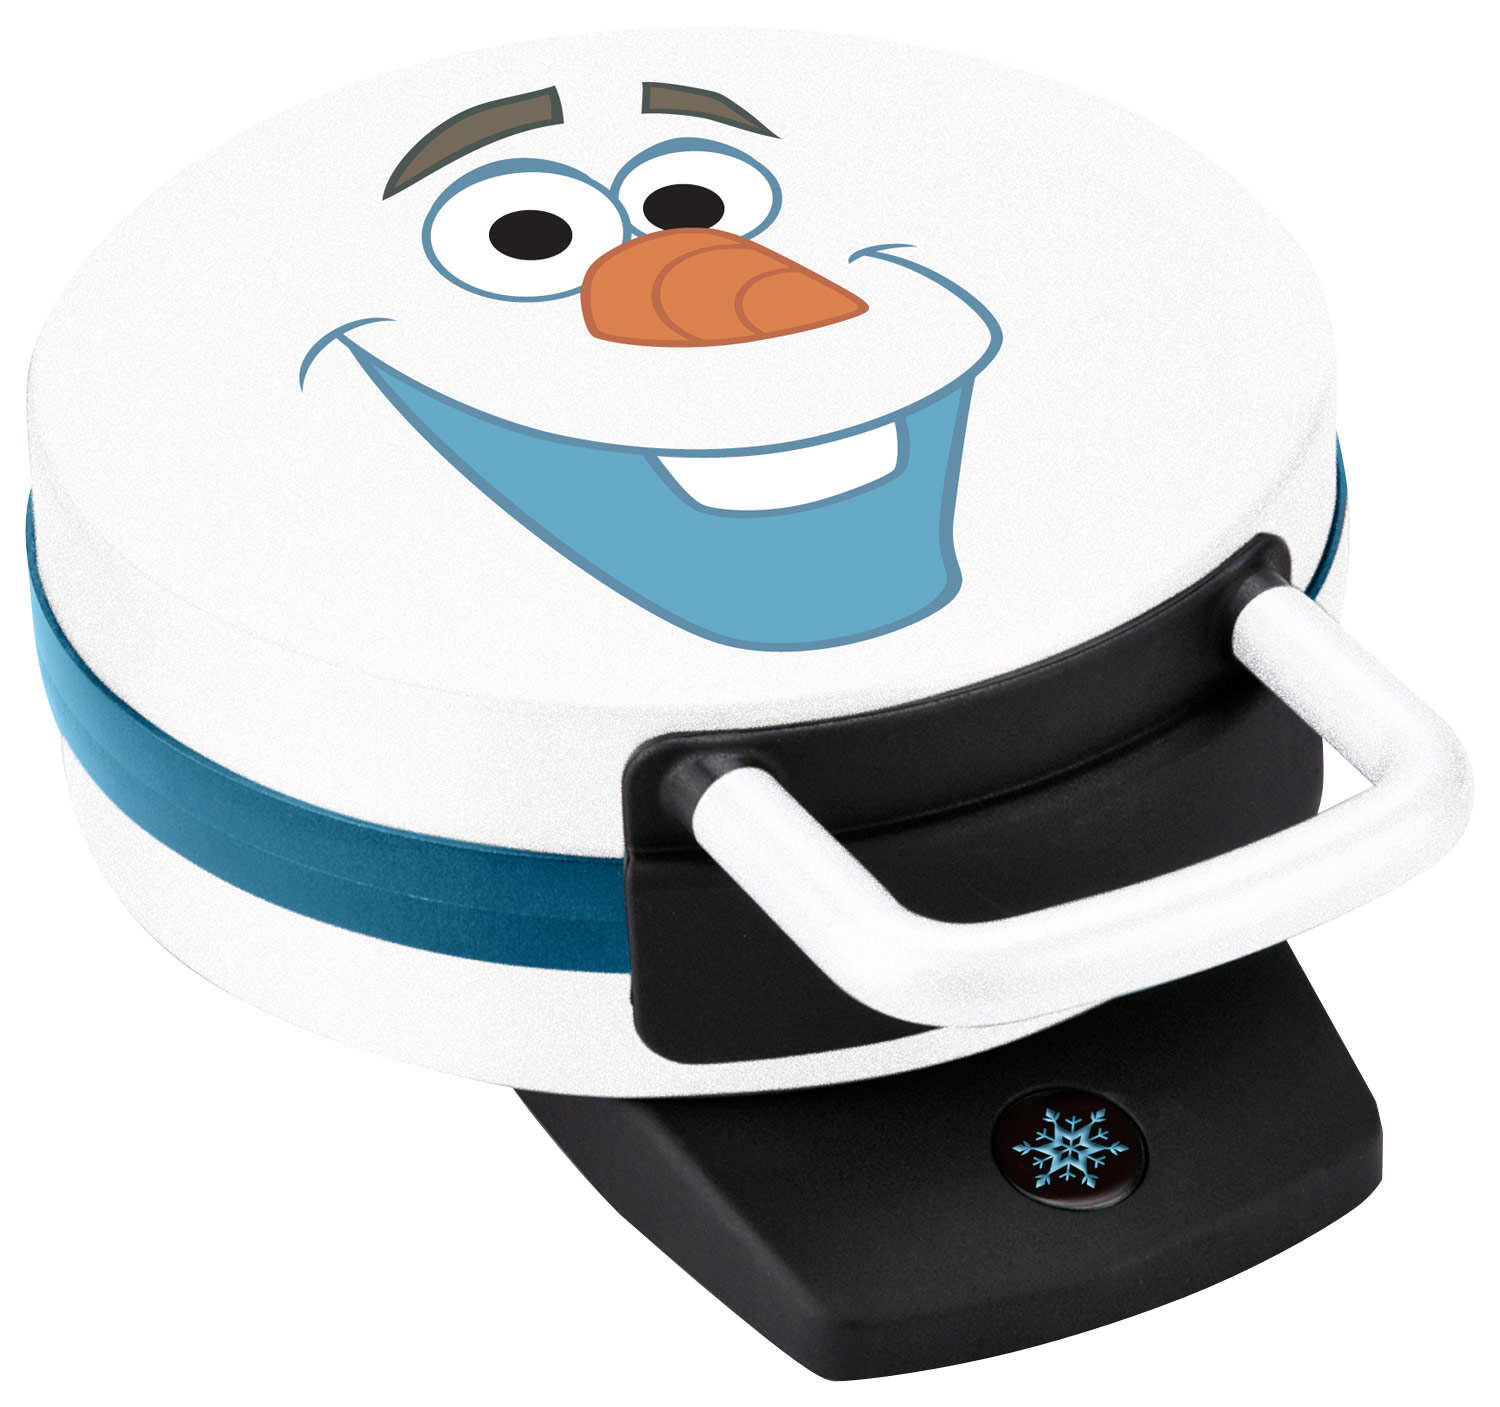 Disney Waffle Makers for All!